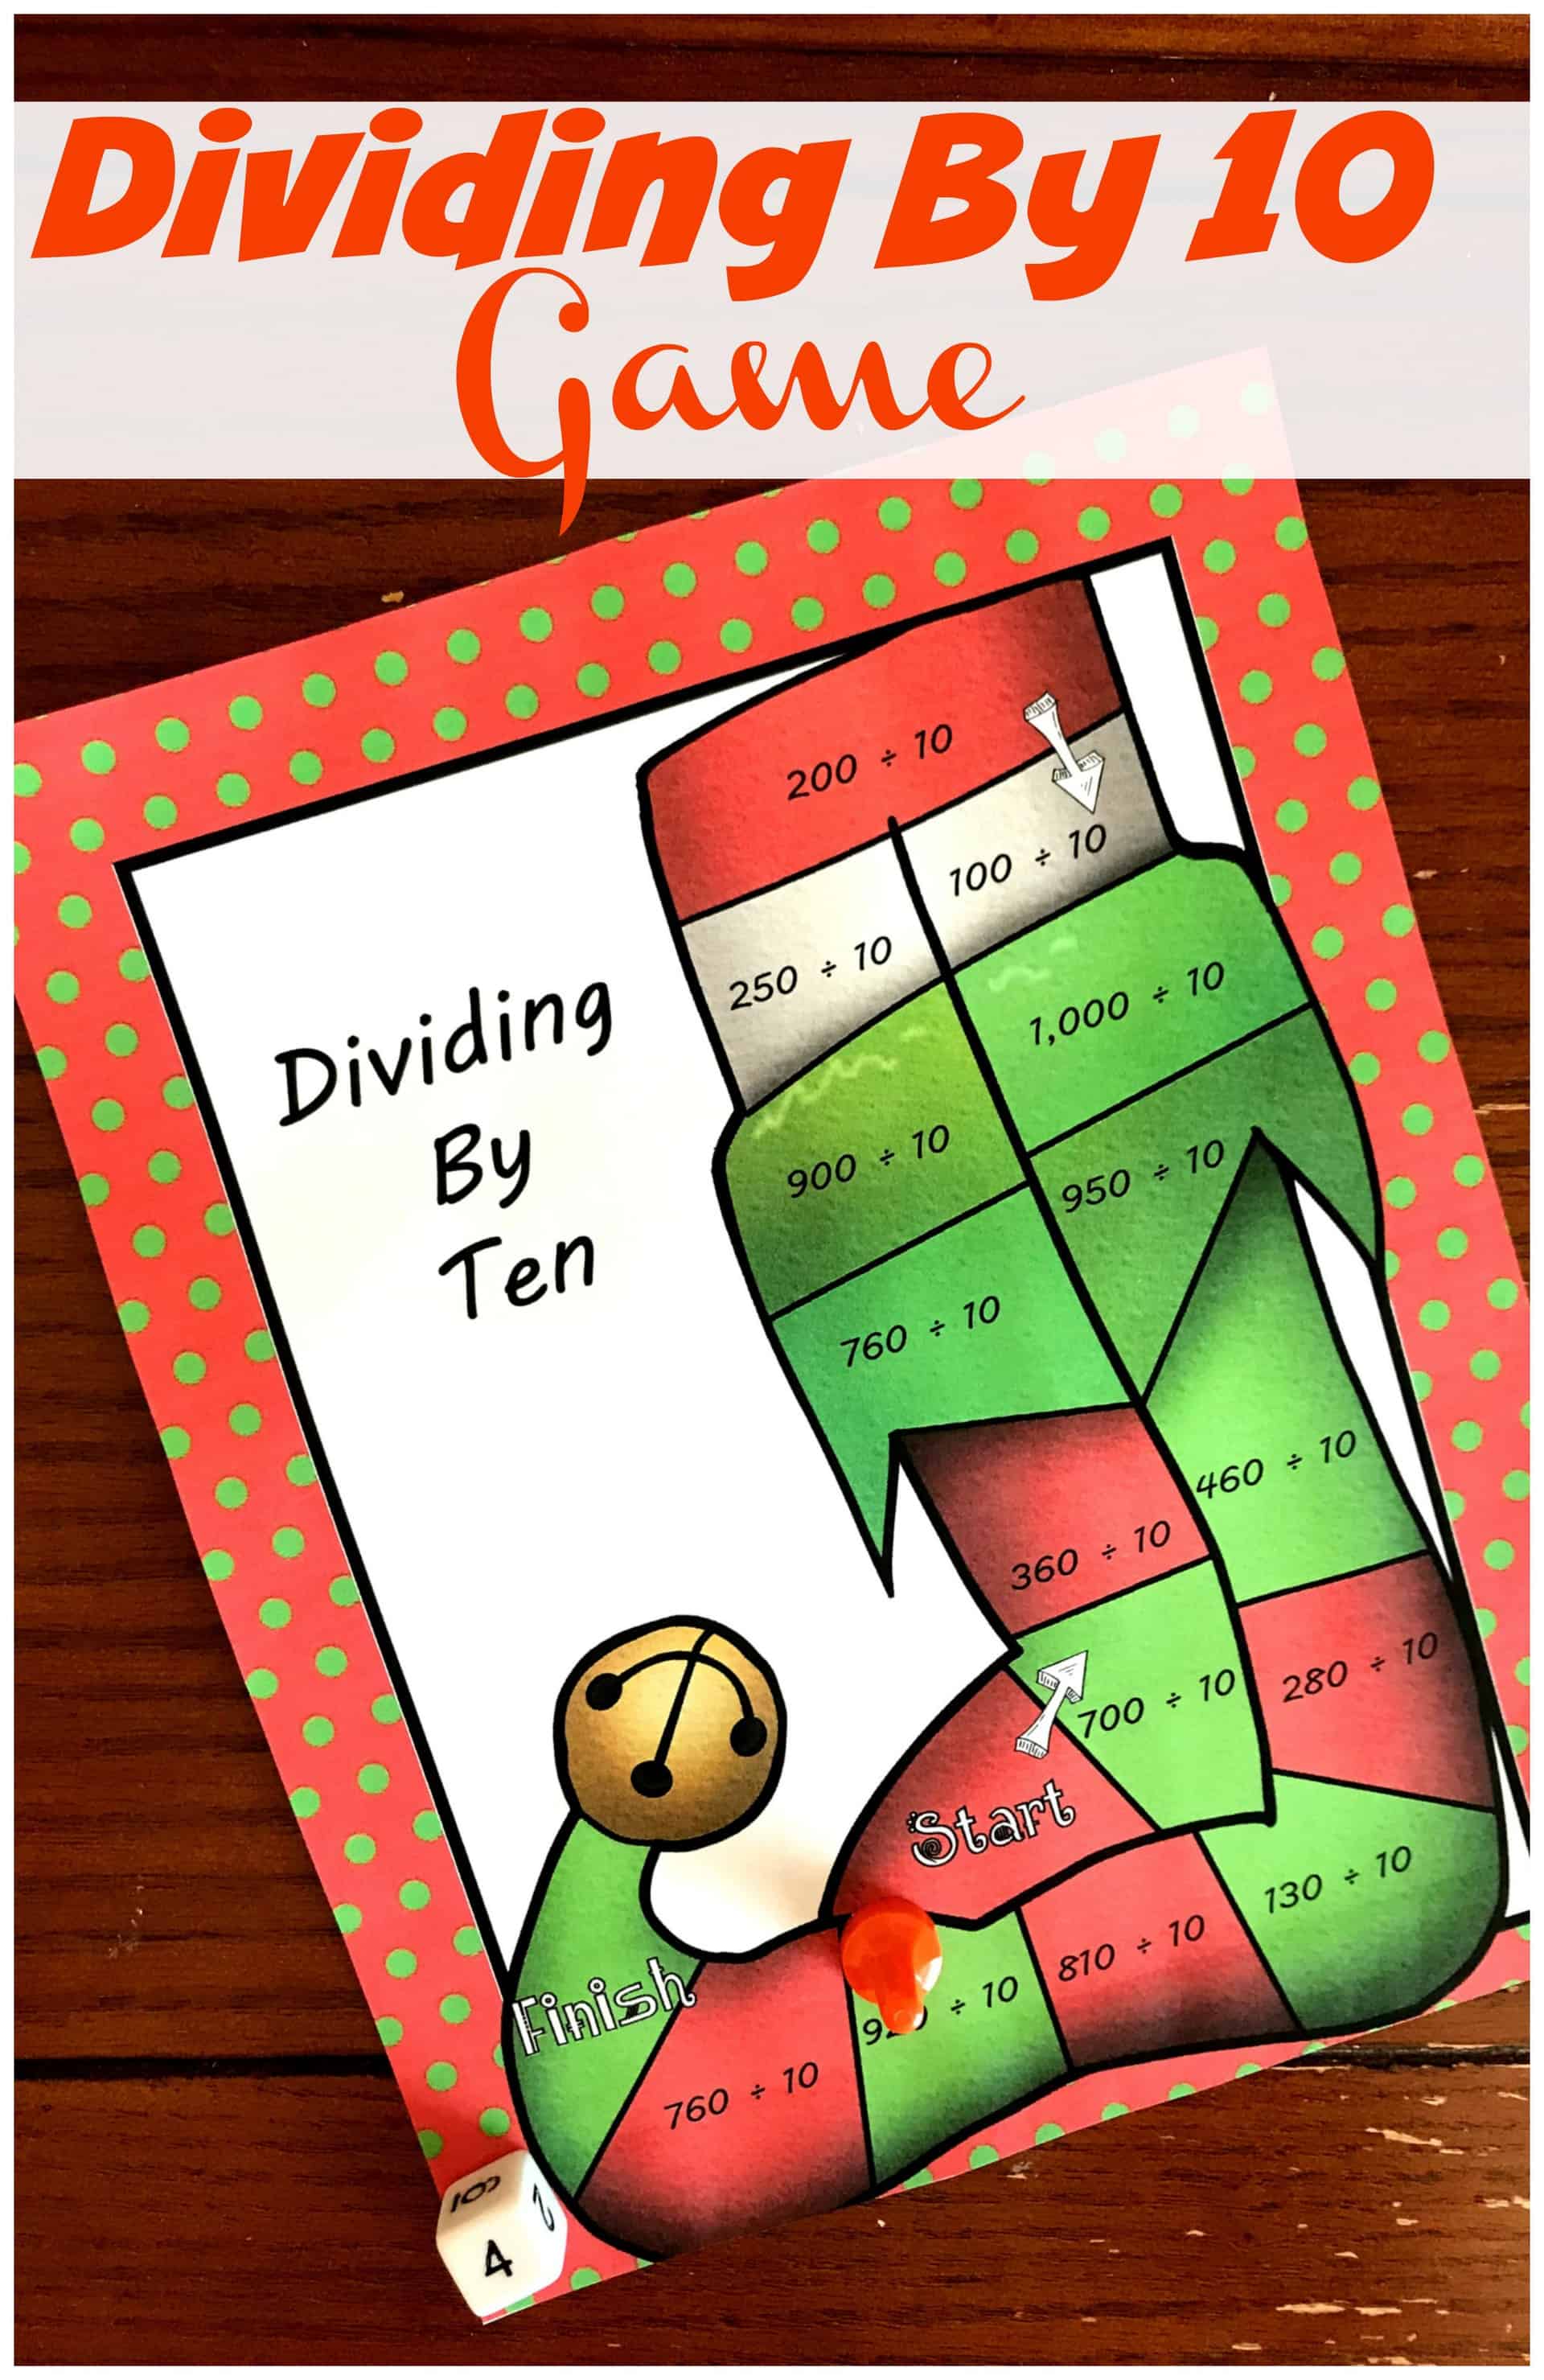 This free no-prep dividing by 10 game is a fun way to practice dividing by 10. Just grab some game pieces and dice and you are ready to play.